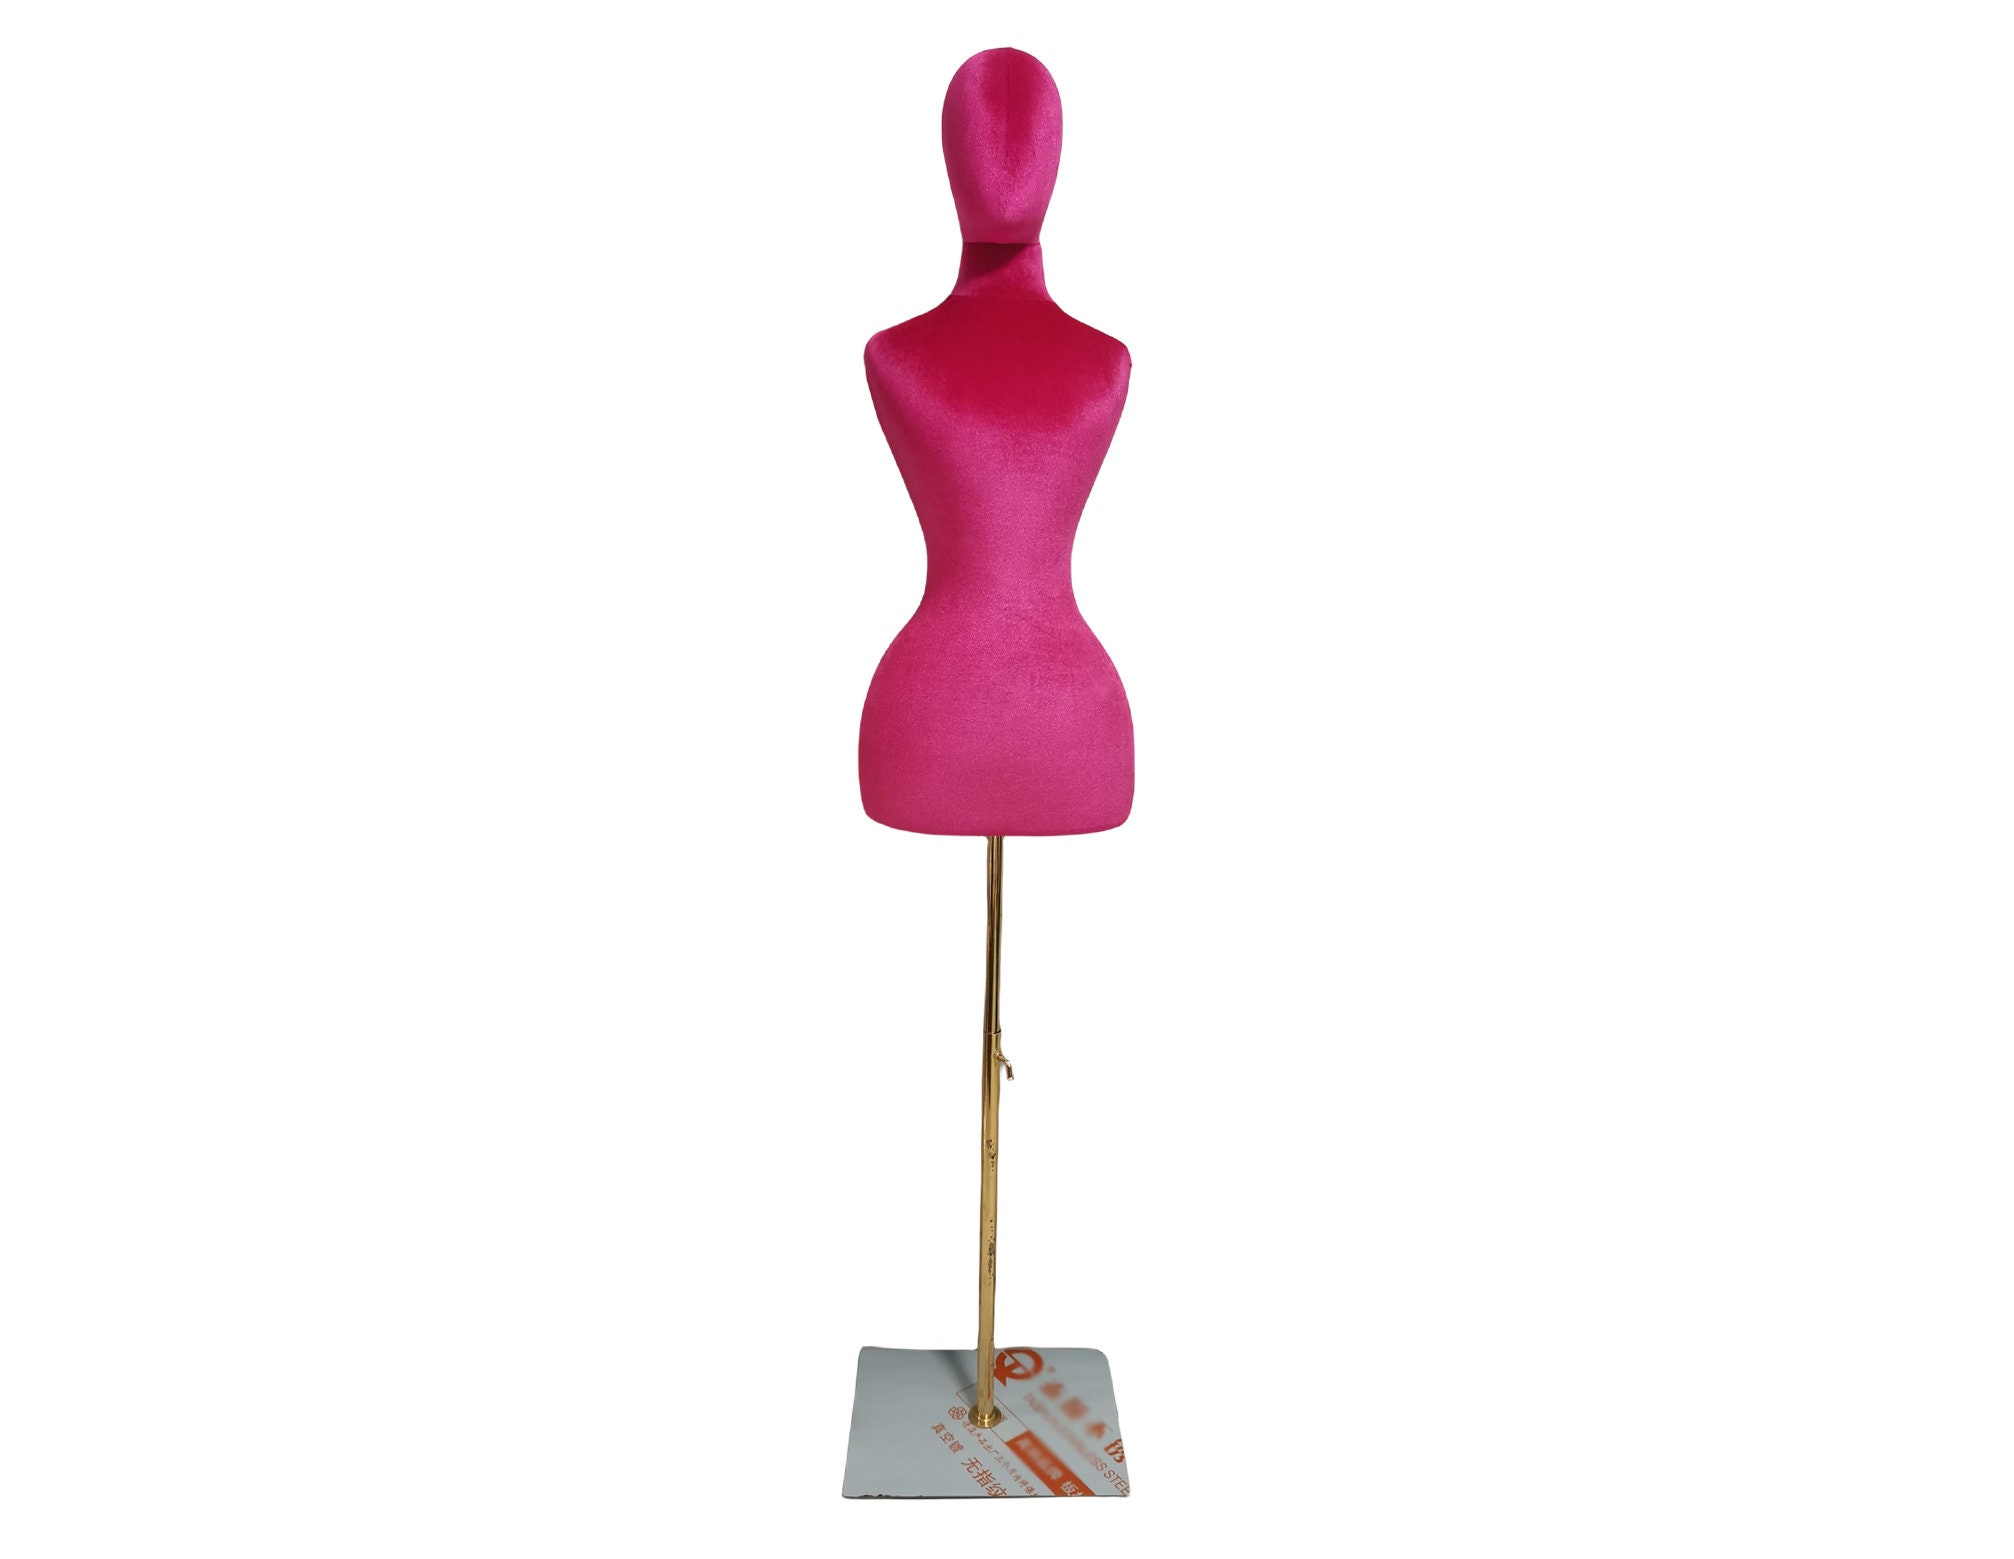 Luxury Pink Full Body Female Display Dress Form,standing Velvet Fabric  Mannequin Torso,manikin Head for Wigs,clothing Display Stand Holder 